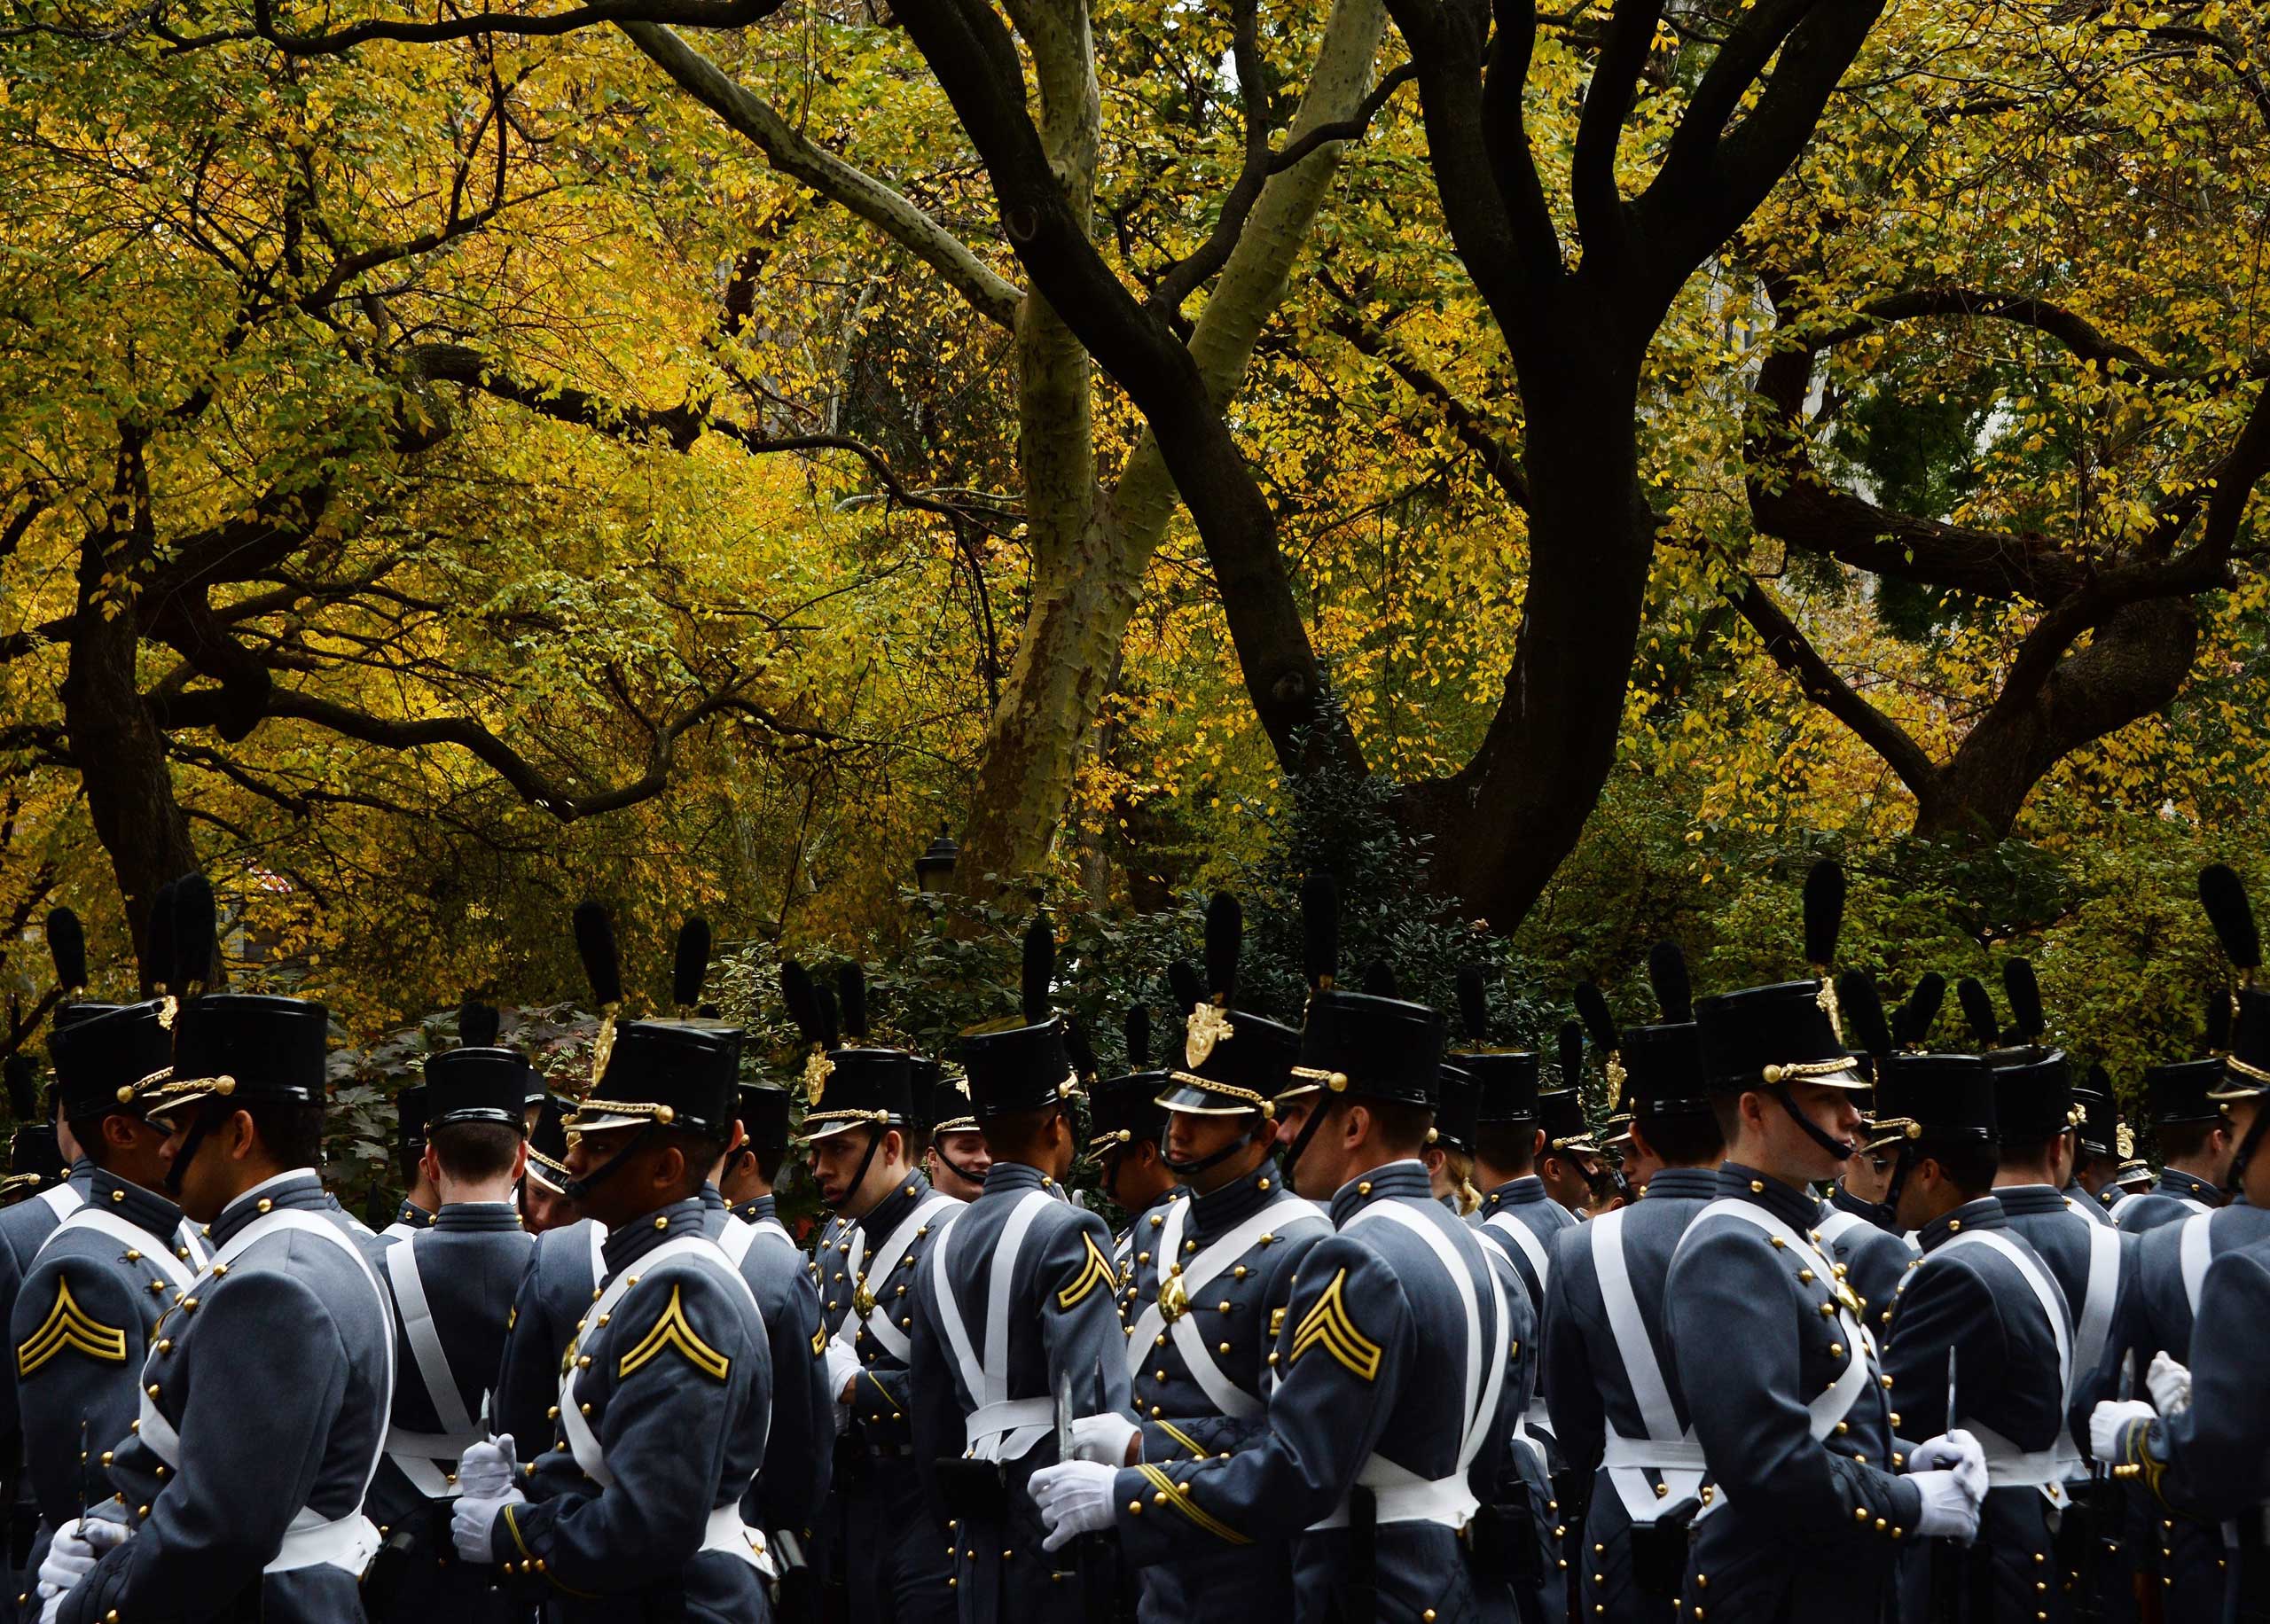 Nov. 11, 2014. Cadets from the U.S. Military Academy at West Point gather for the annual Veterans Day parade in New York City.